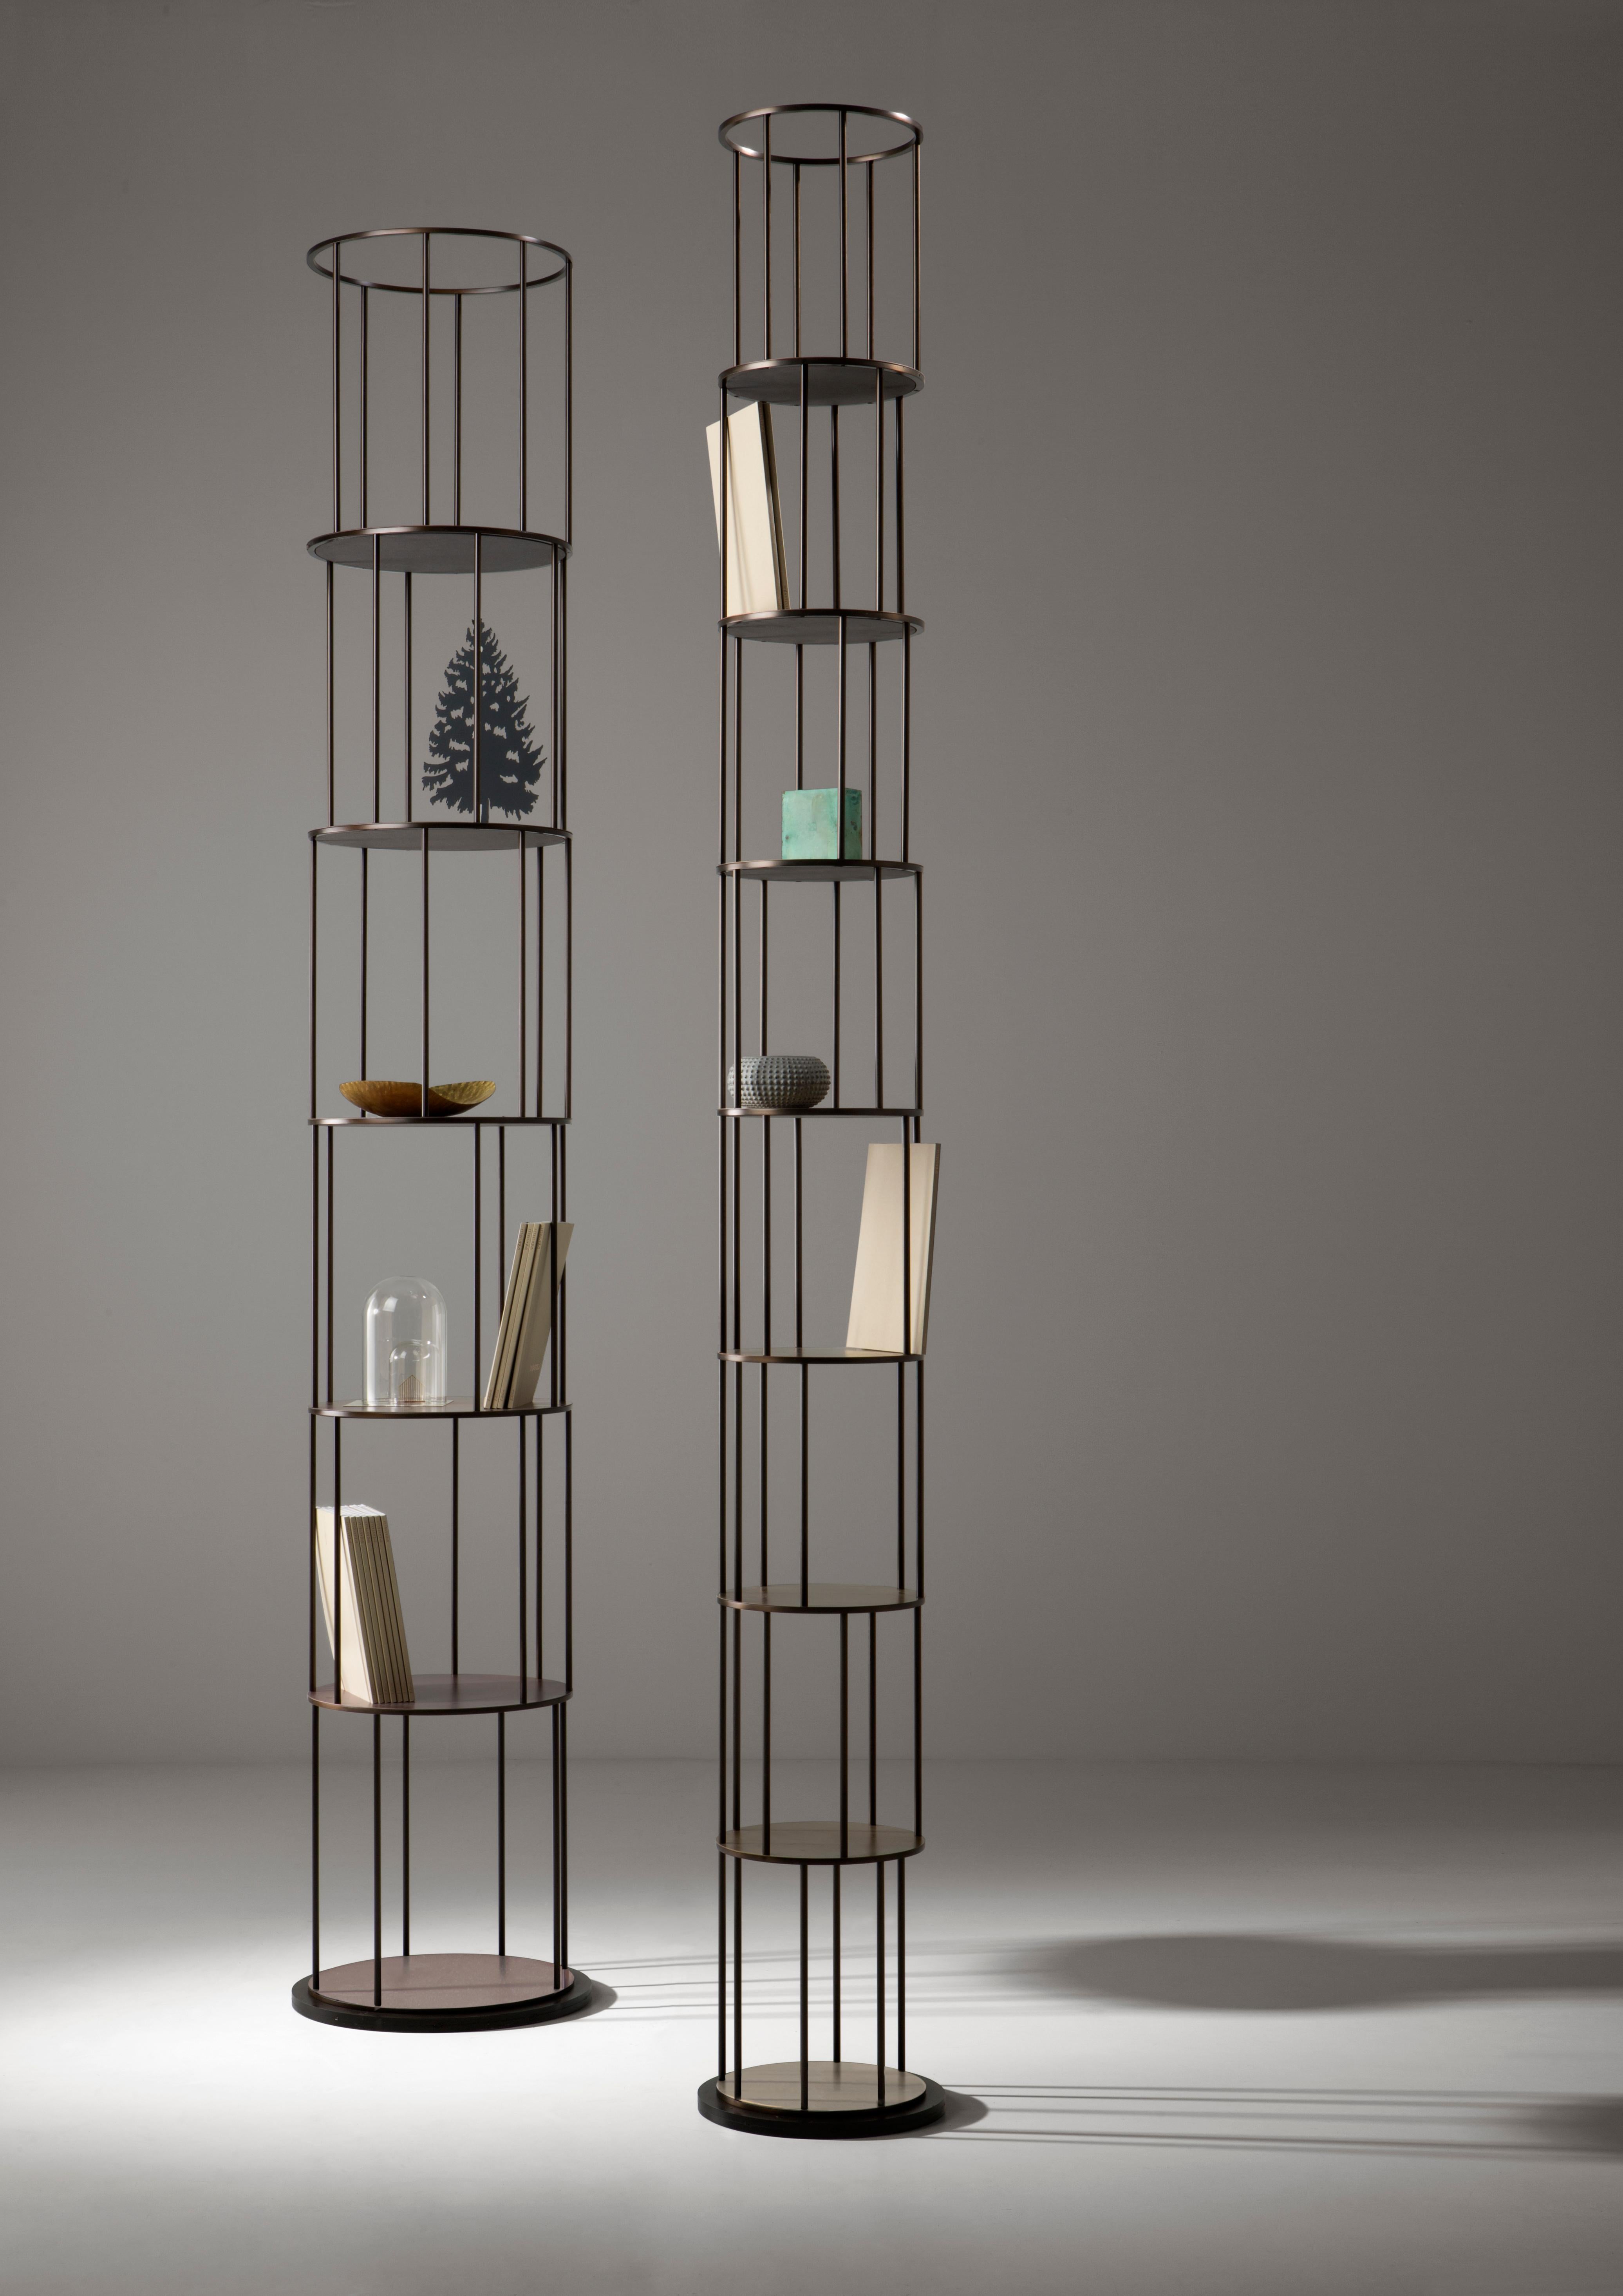 Aspirations of higher knowledge find three-dimensional representation in the striking verticality of this tower bookcase, stripped of all non-essential elements. The svelte modular structure, available in two diameters and in free-standing or